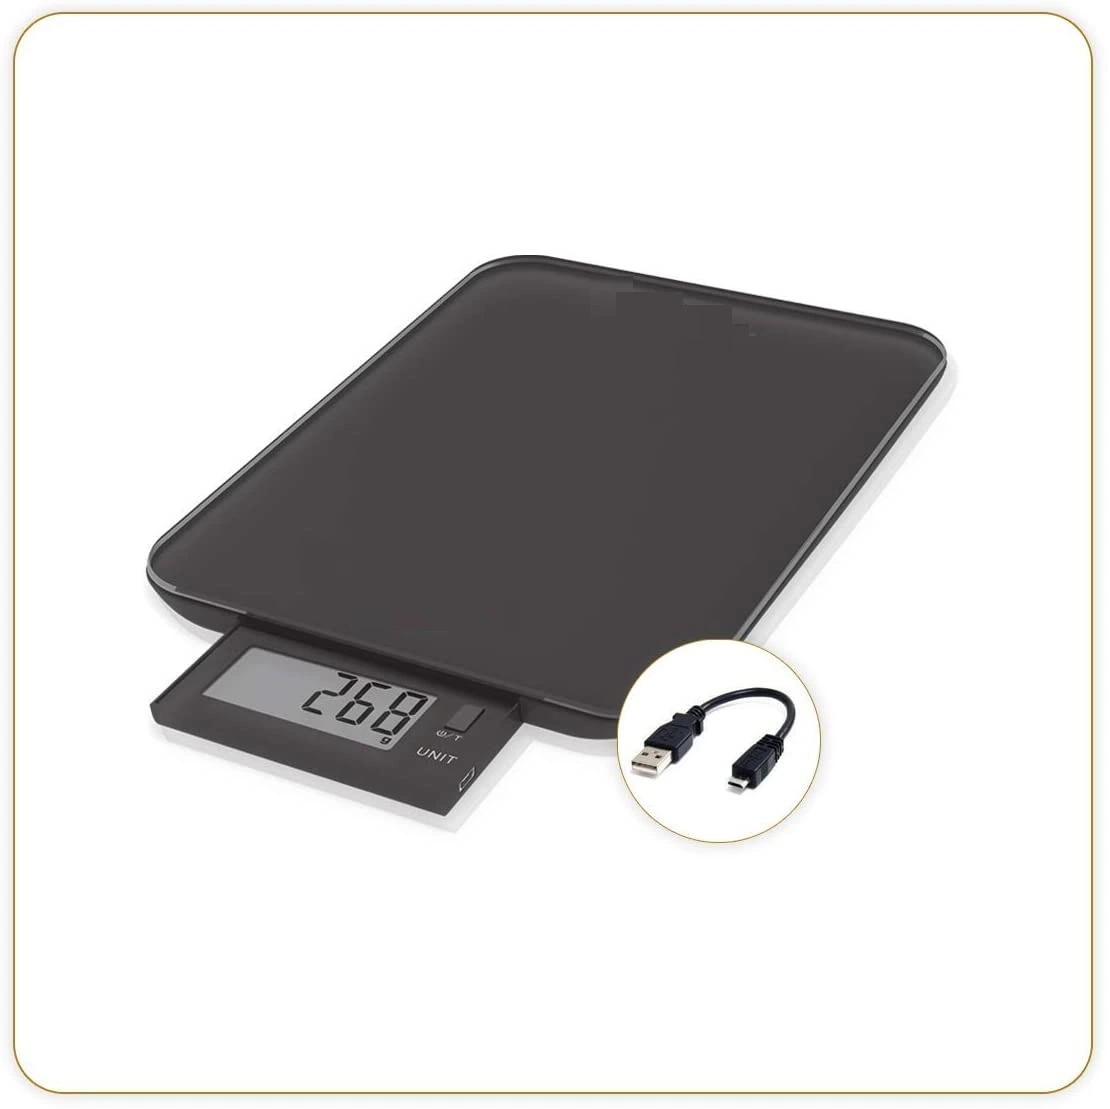 New Design Digital Electronic Kitchen Scale for Baking and Cooking Kitchenware